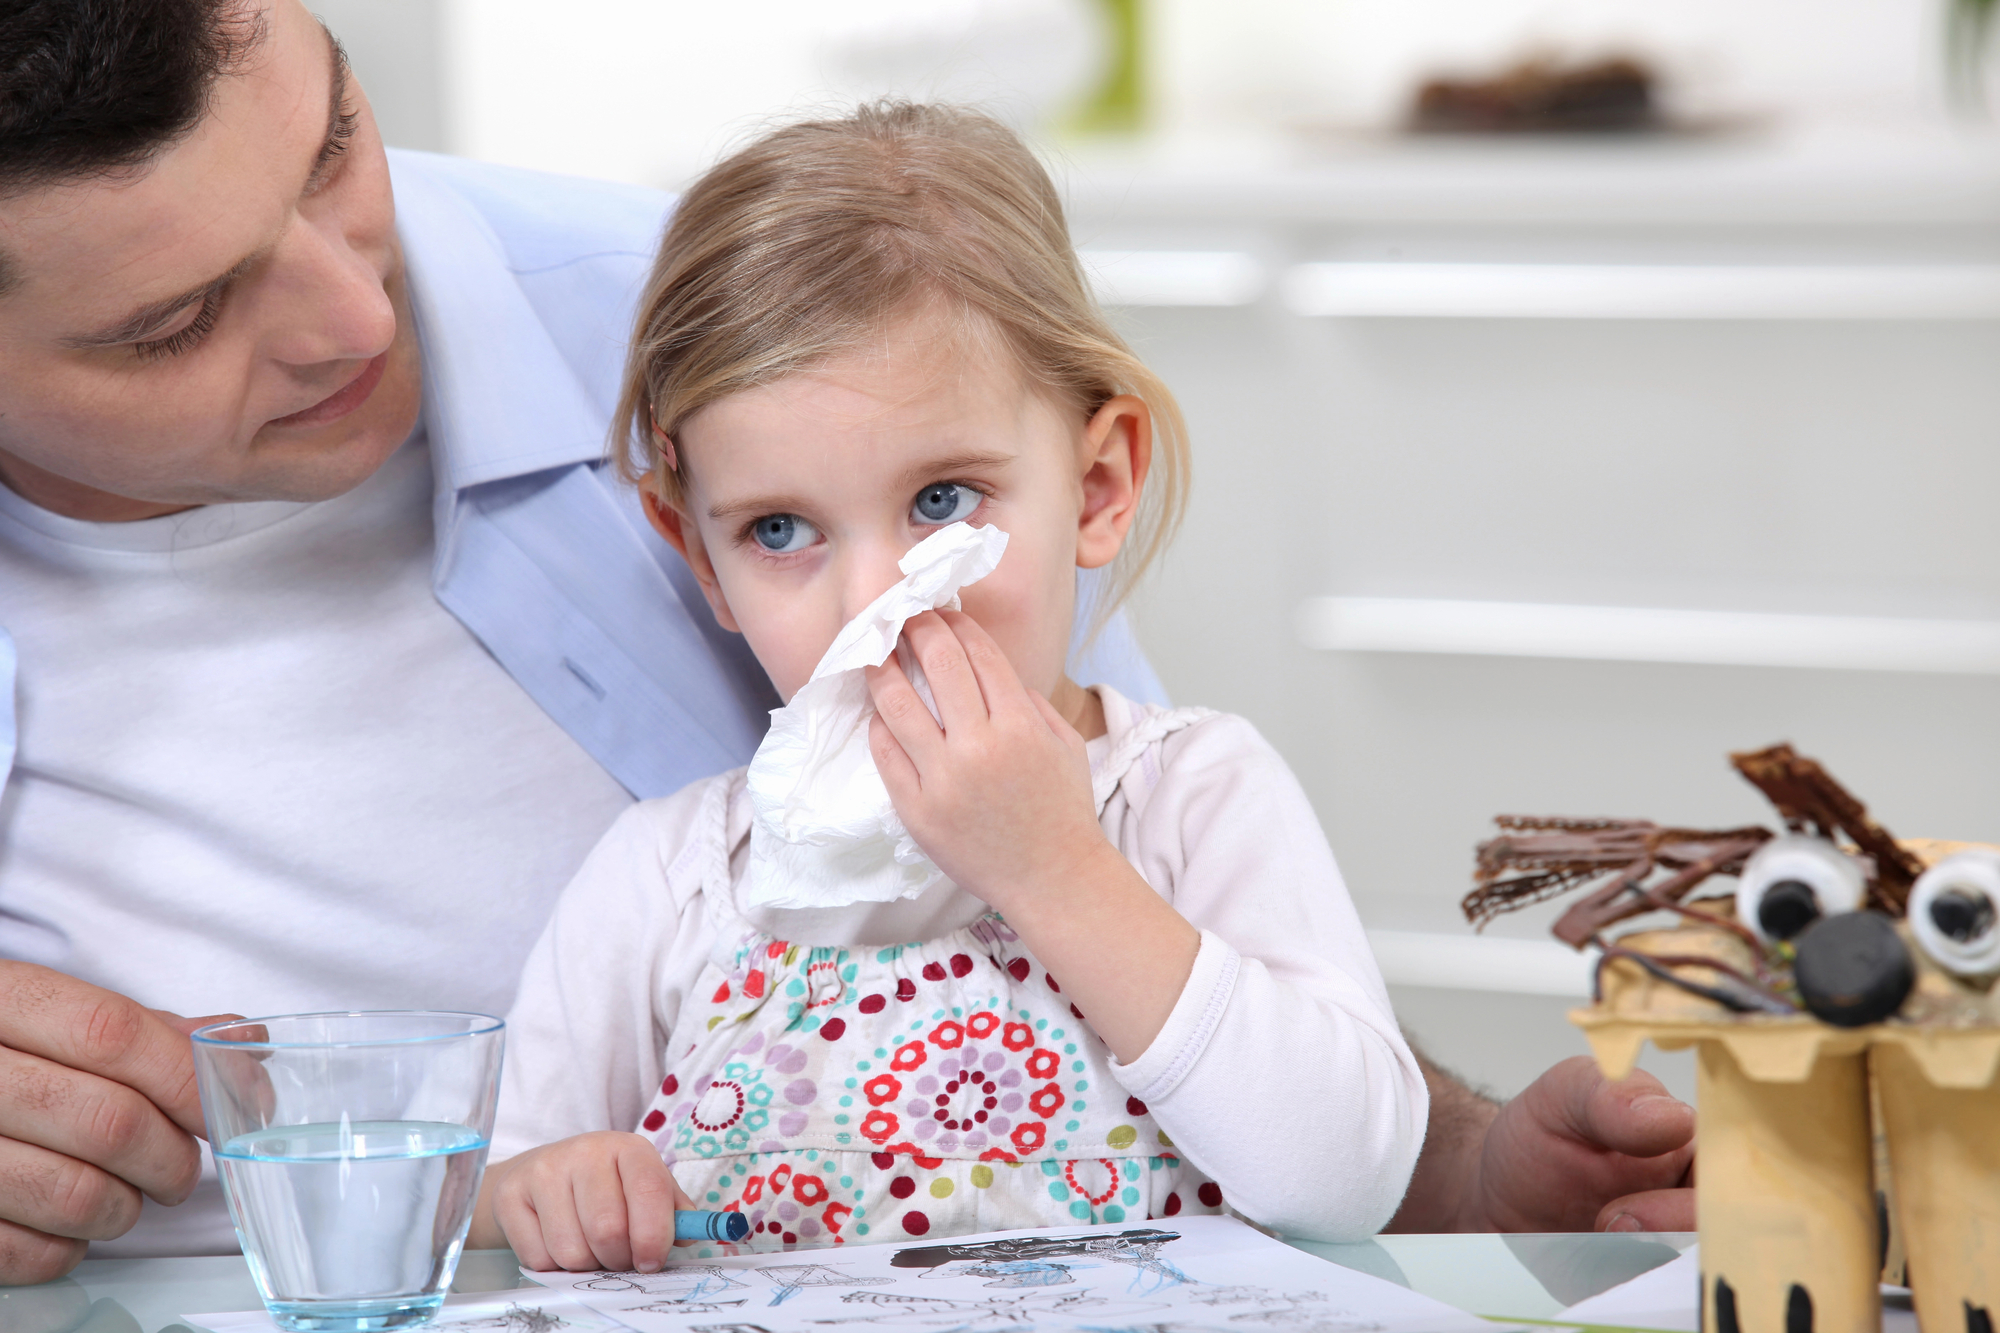 A concerned father sits beside his young daughter who is wiping her nose with a tissue, with a glass of water and a playful handmade owl craft on the table